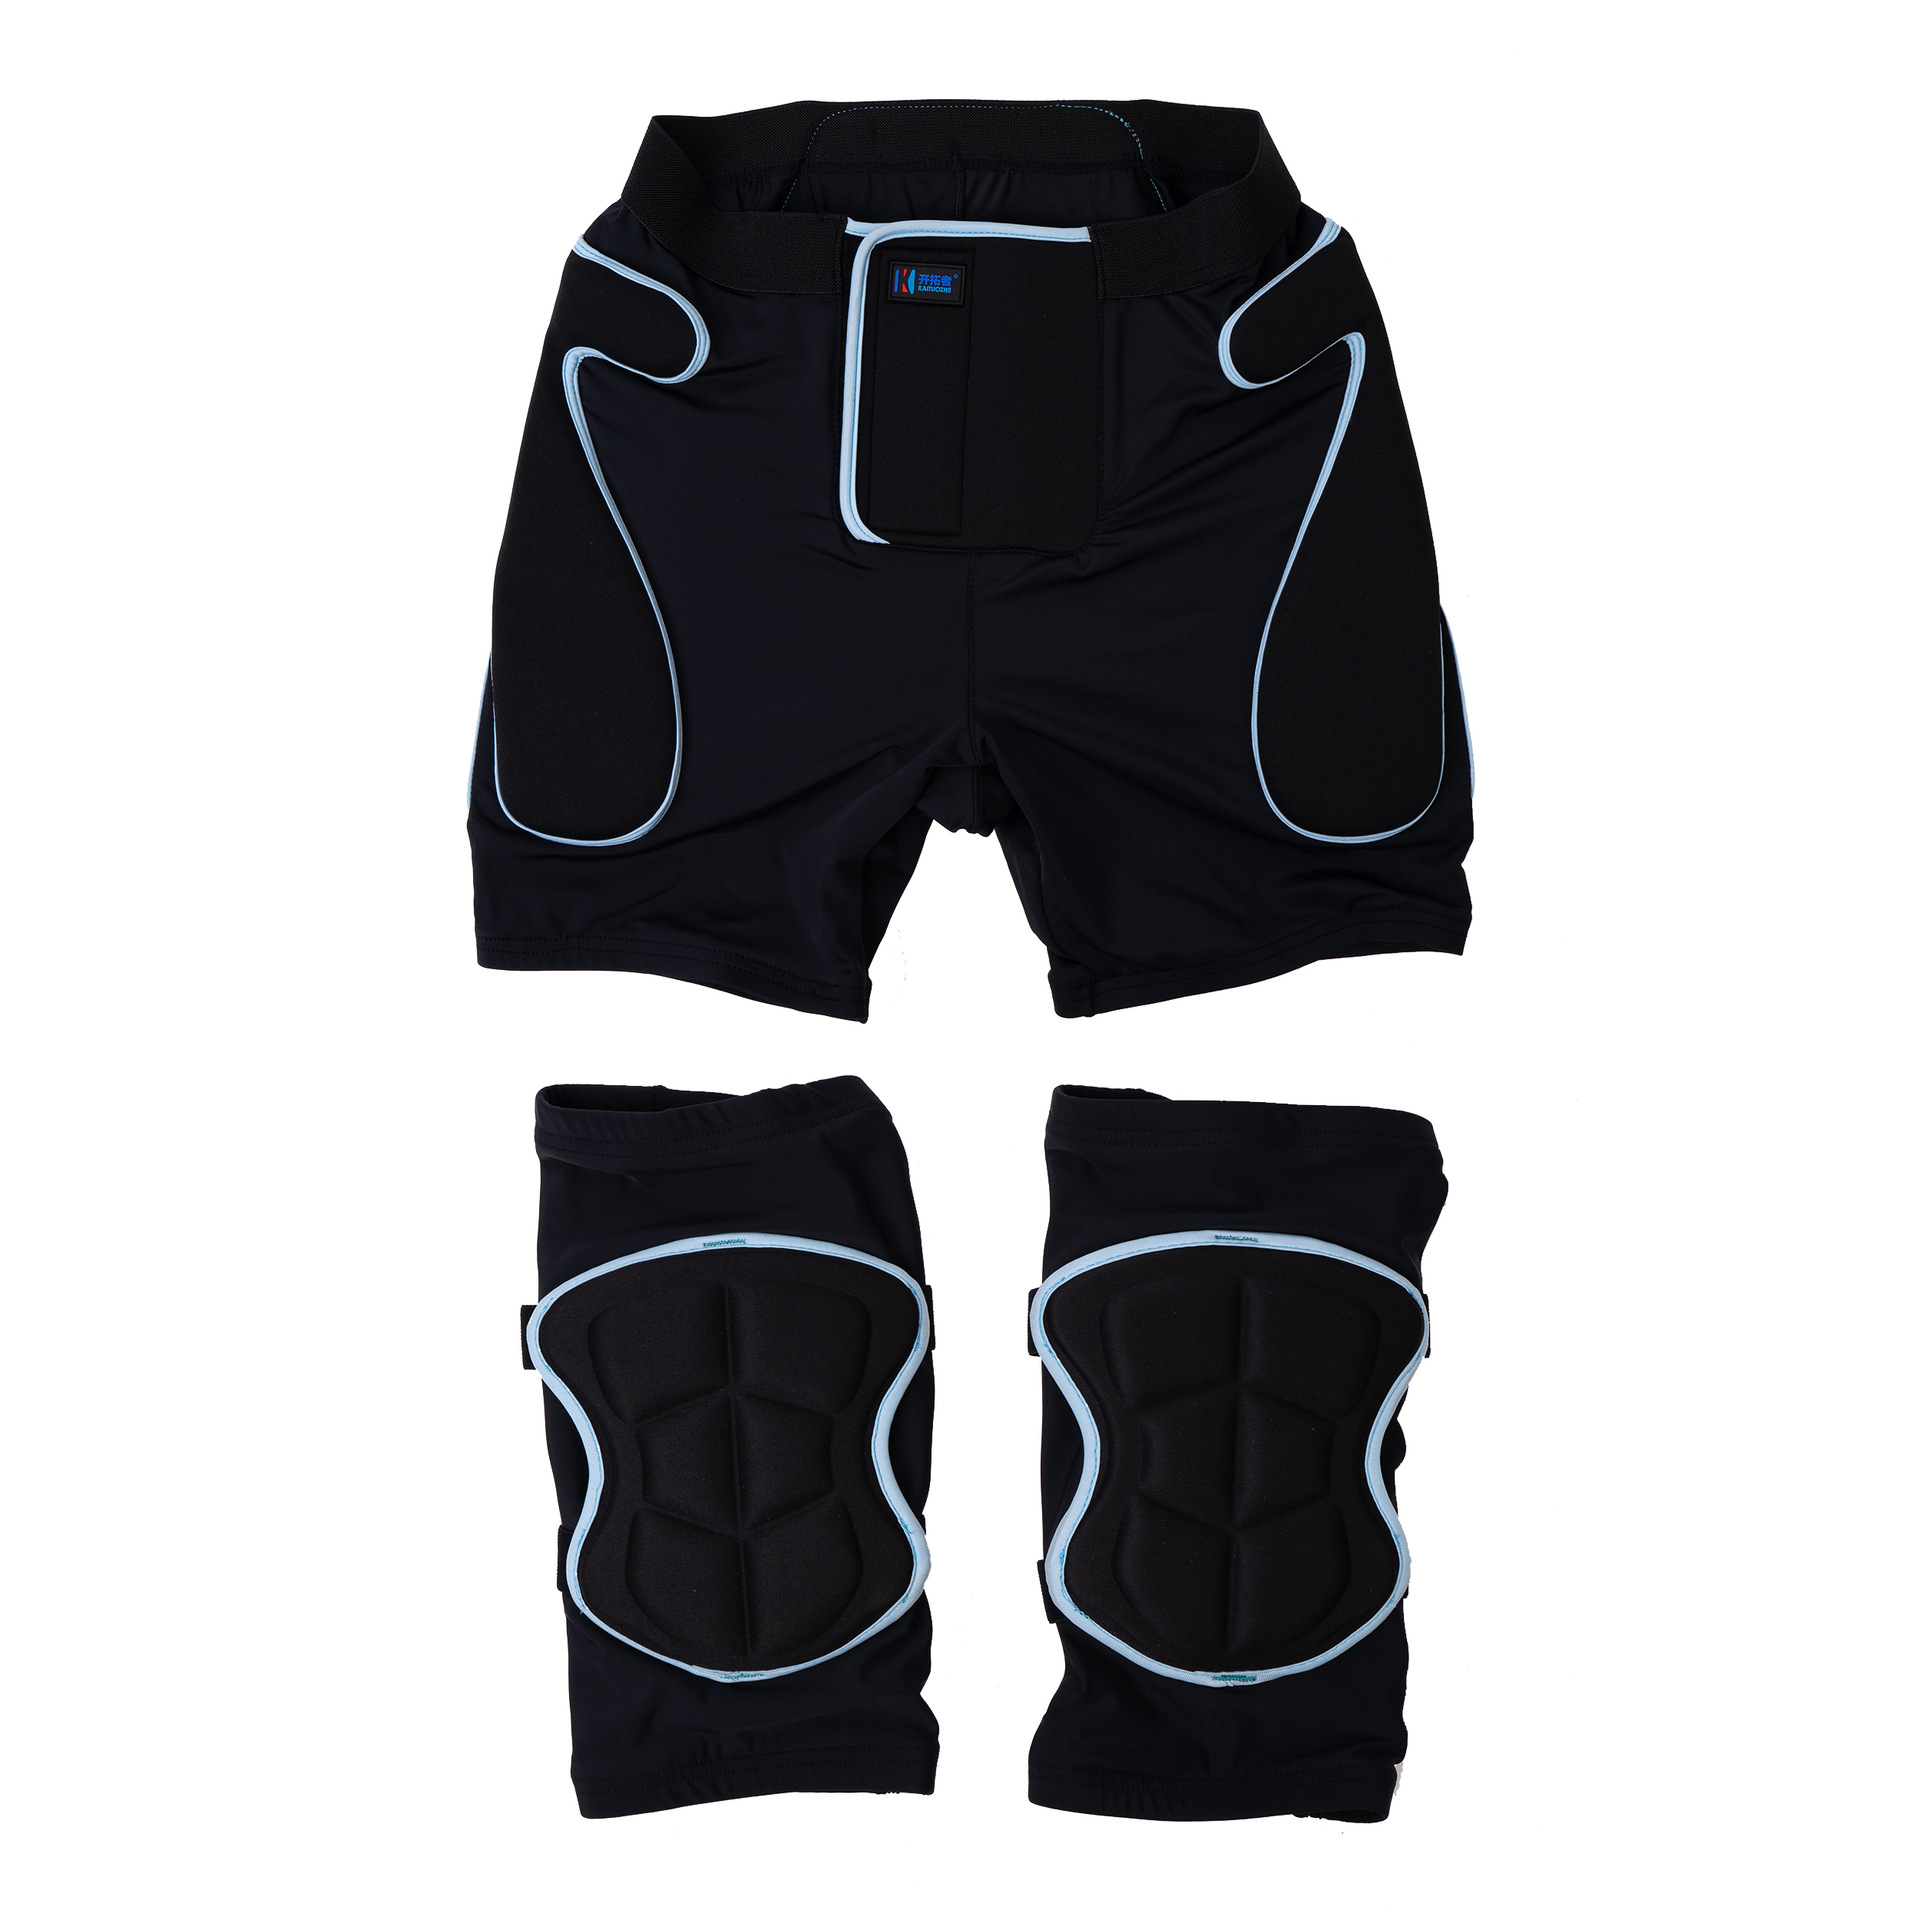 Protective Gear Set for Adult Knee Pads & Short Pants for Skiing Roller Skating